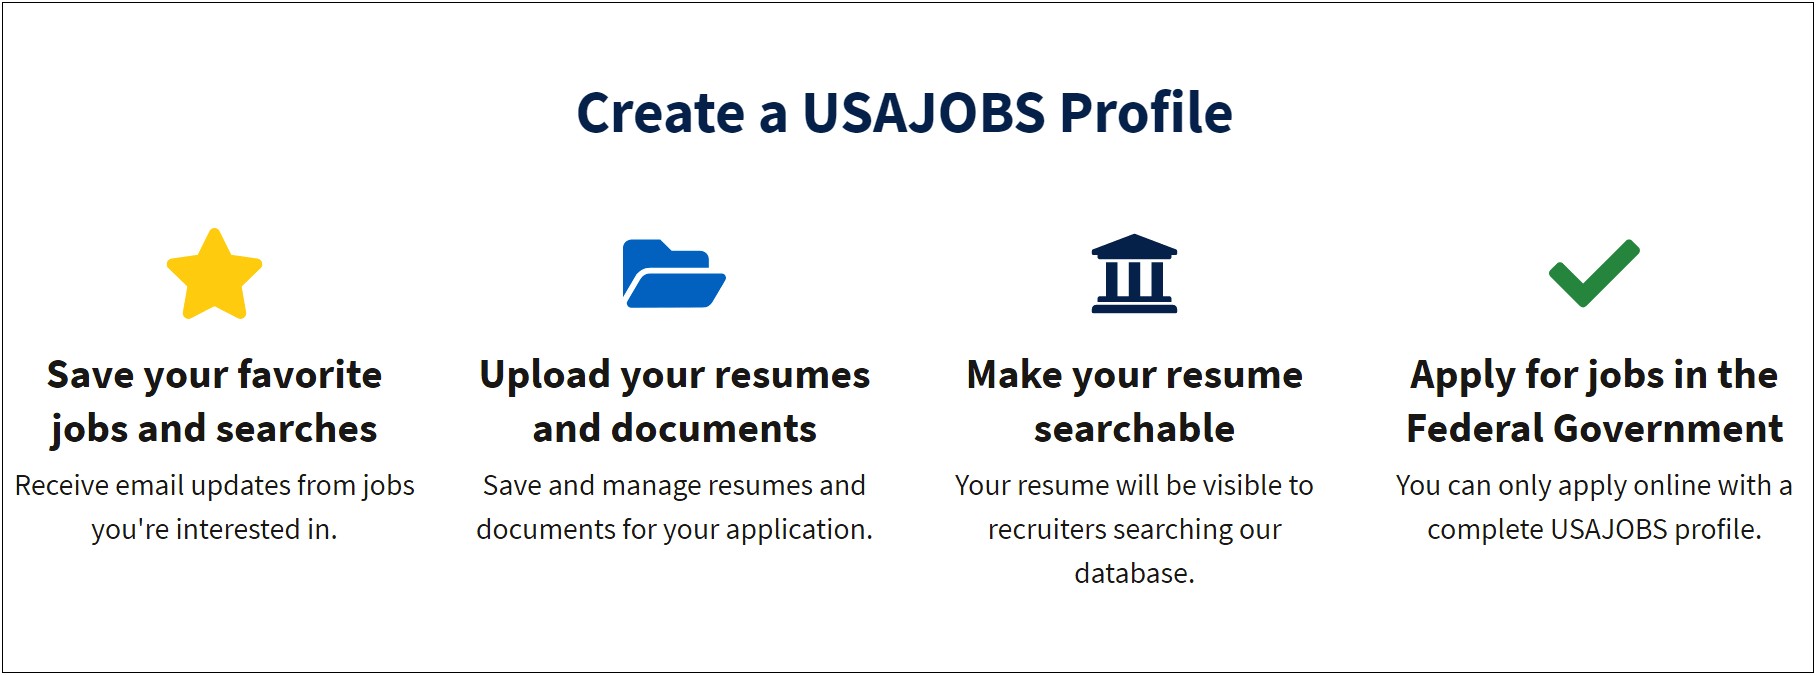 Usa Jobs Upload Resume Button Does Nothing